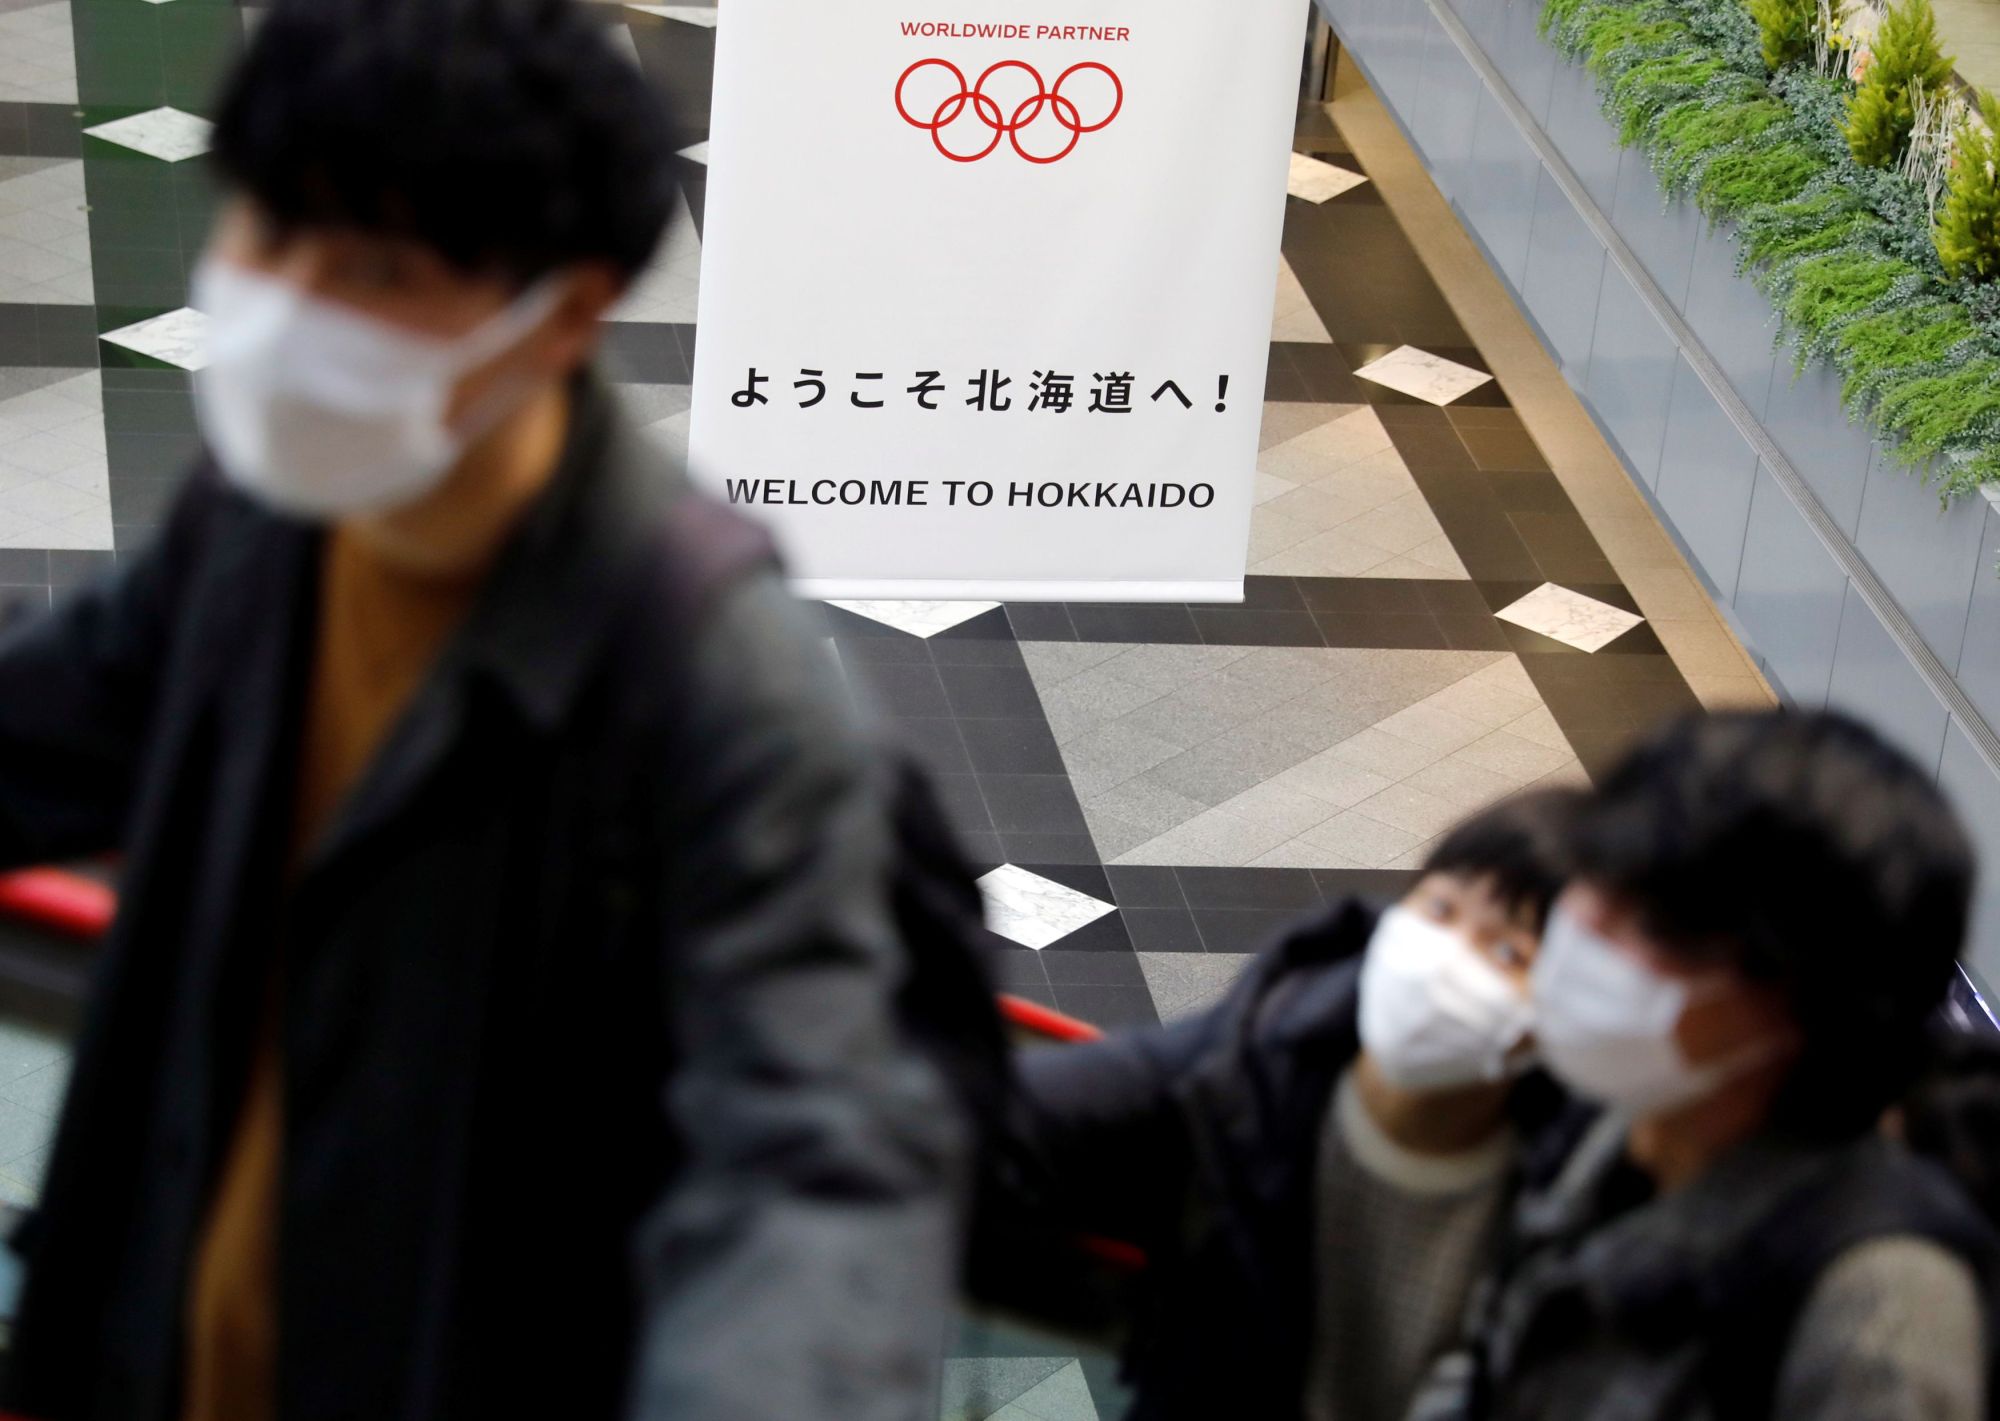 Passengers wearing protective face masks due to the coronavirus outbreak pass a banner for the Tokyo 2020 Olympic Games at New Chitose Airport in Chitose, Hokkaido, on Thursday. | REUTERS